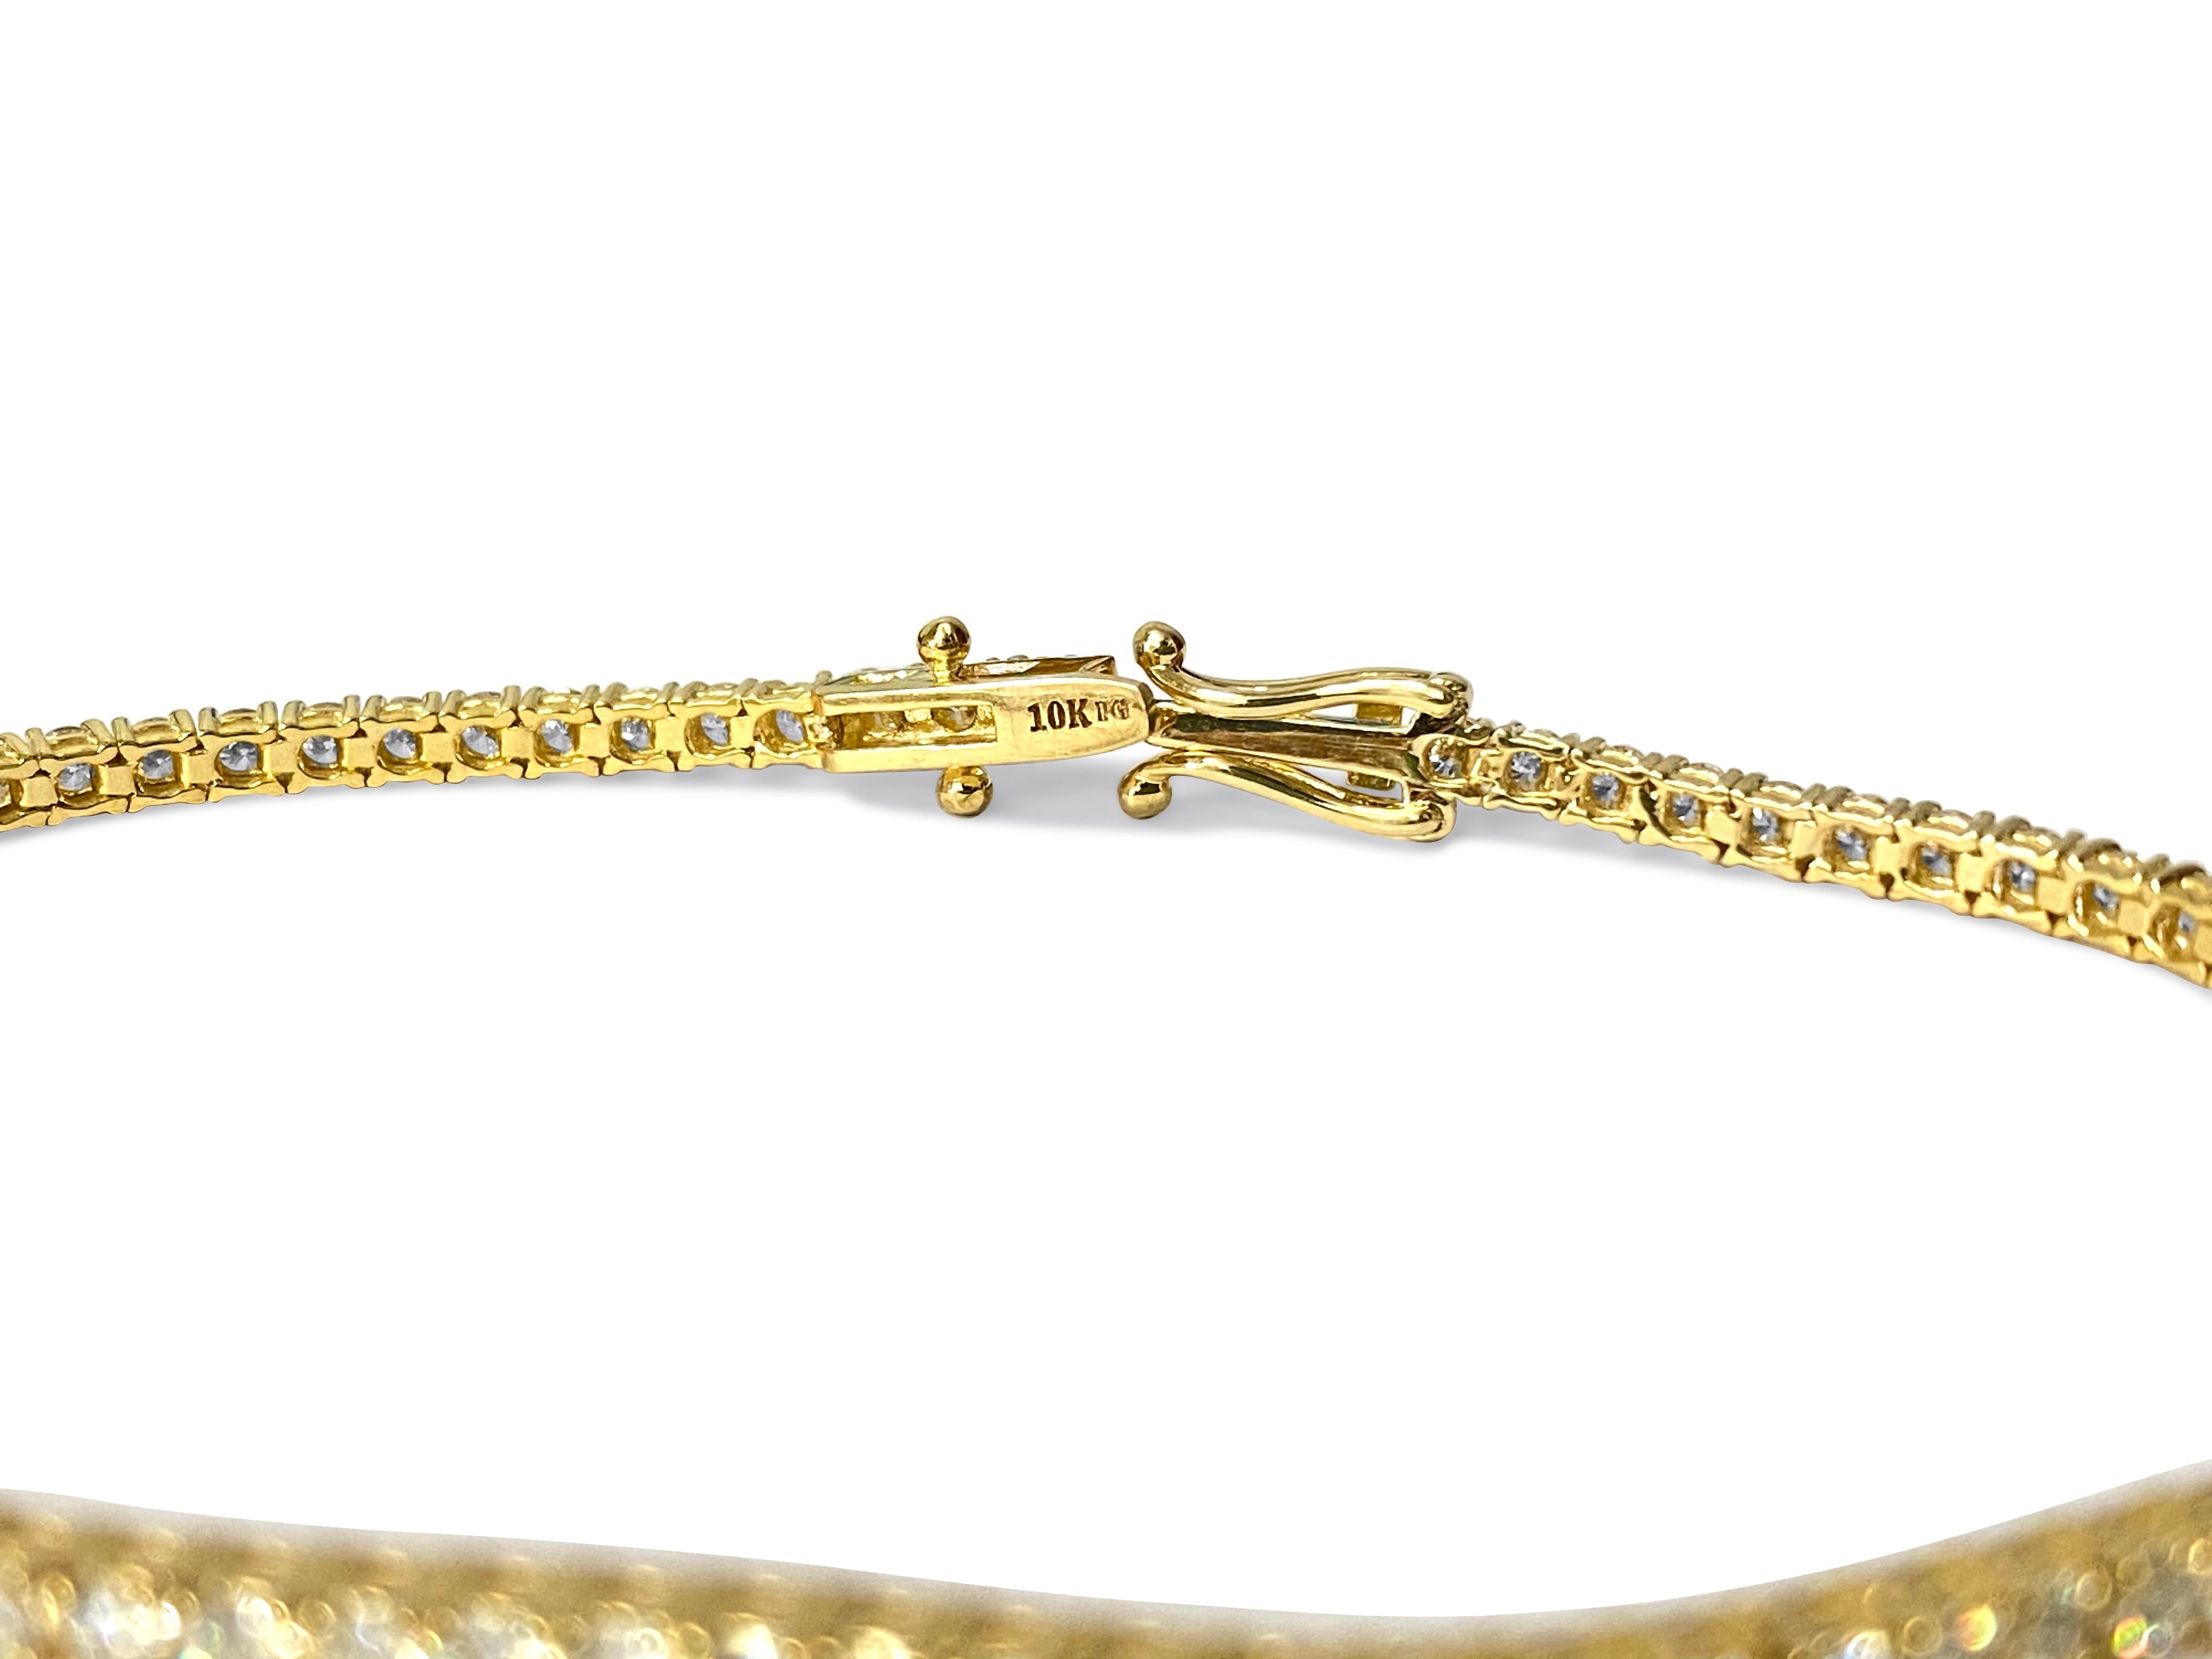 A stunning diamond tennis bracelet meticulously crafted in 14k yellow gold, featuring an impressive total of 4.00 carats of dazzling diamonds. With VVS-VS clarity and H color, these round brilliant cut diamonds are expertly set in prongs, ensuring